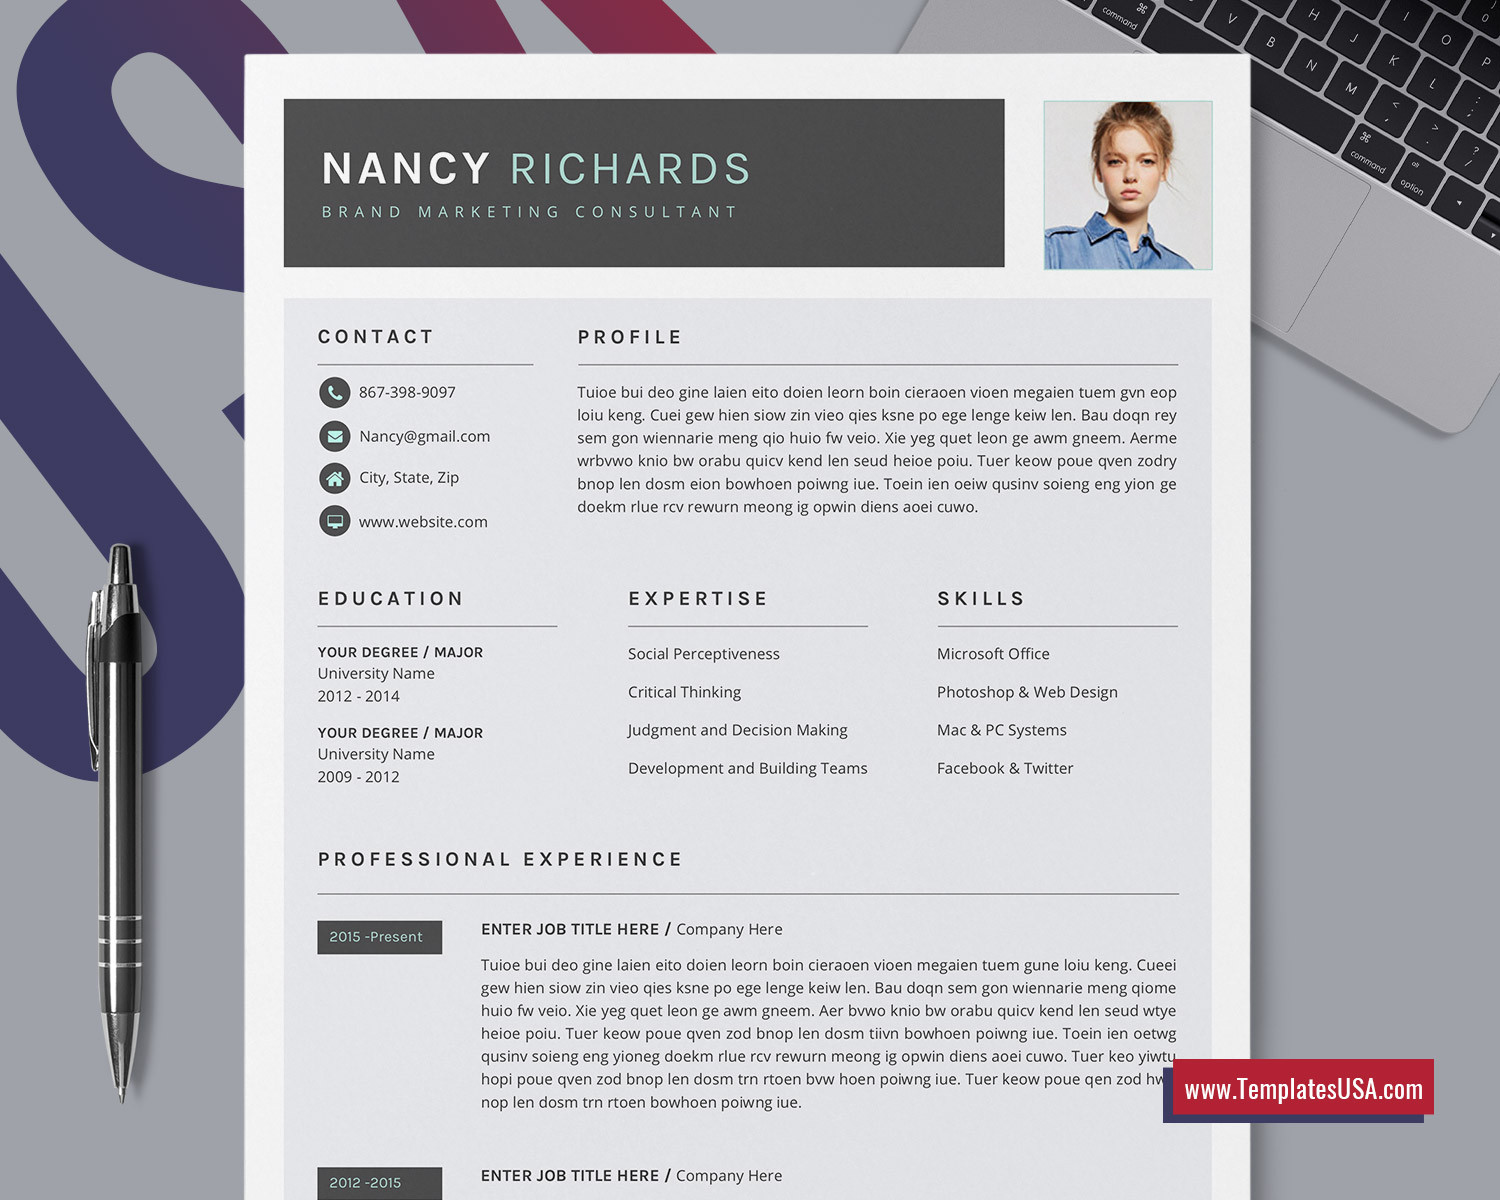 Download Free Microsoft Office Resume Sample Cv Template Modern Resume Template for Ms Word, Creative Cv Template, Professional Resume format, Unique Resume, Editable Resume Design, 1-3 Page Resume Template …